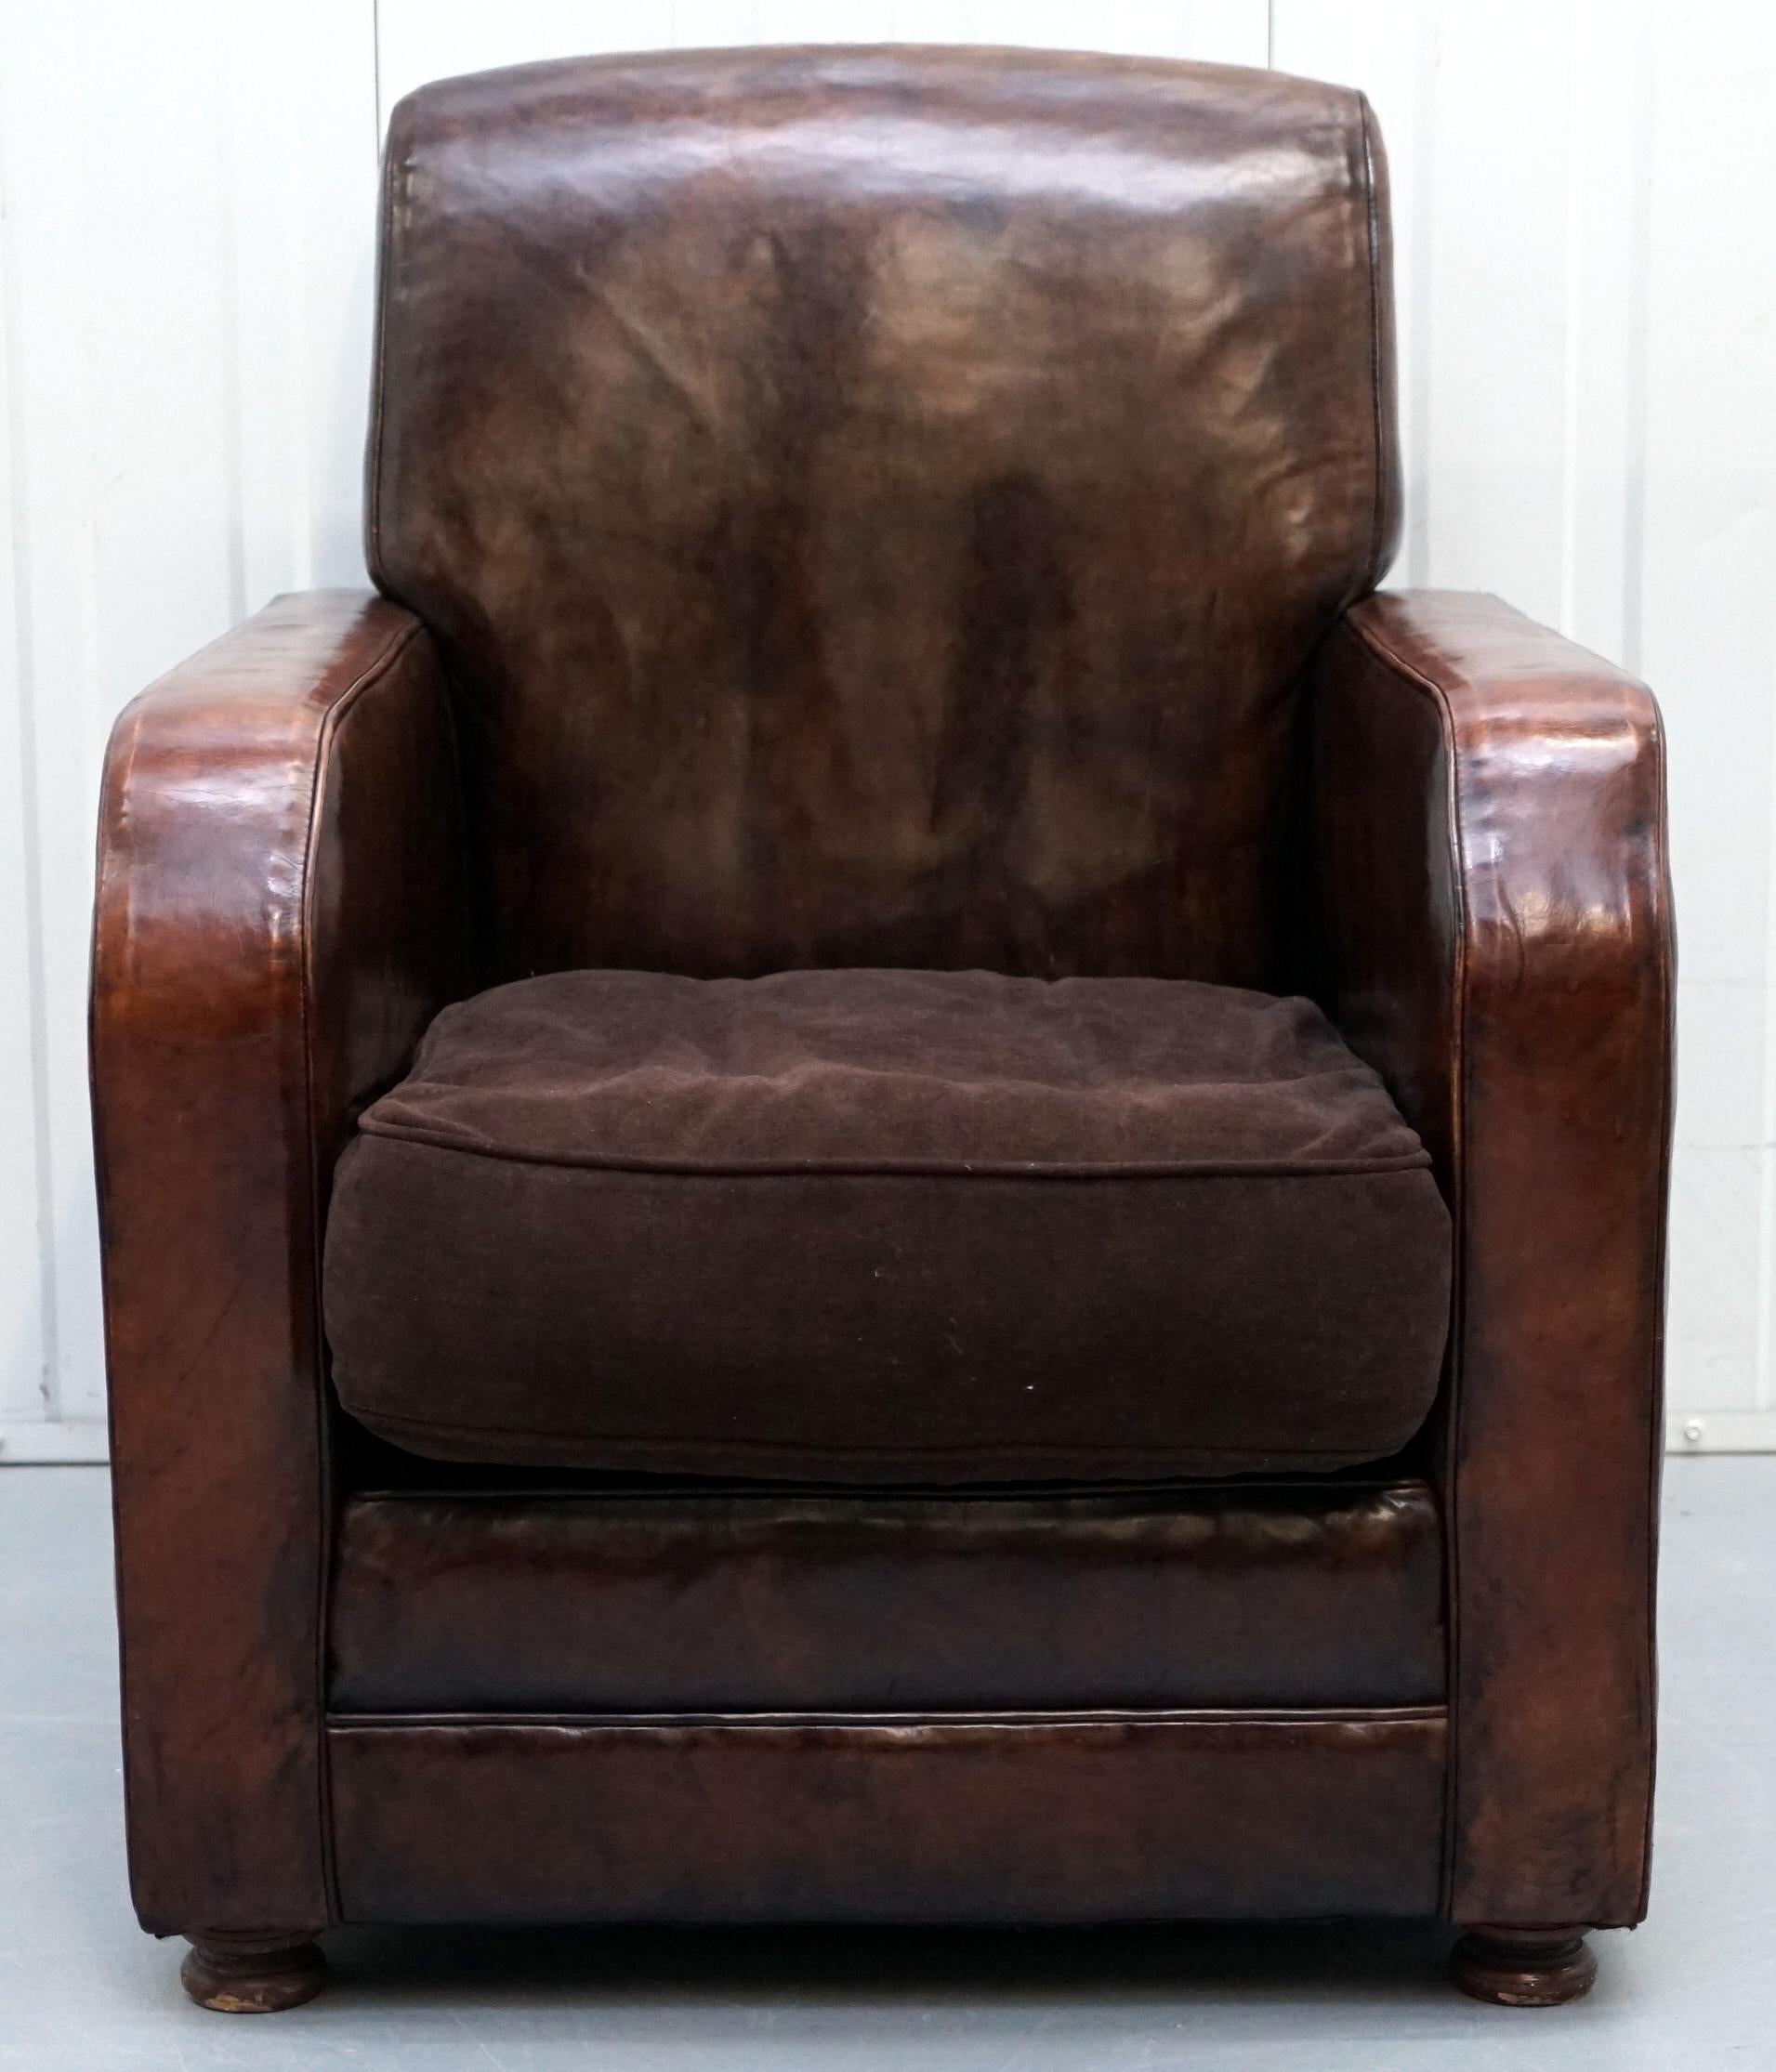 We are delighted to offer for sale this lovely hand dyed aged brown leather coil sprung club armchair with velvet feather filled cushion

A very well made and exceptionally comfortable club armchair, the velvet cushion is what’s called a summer